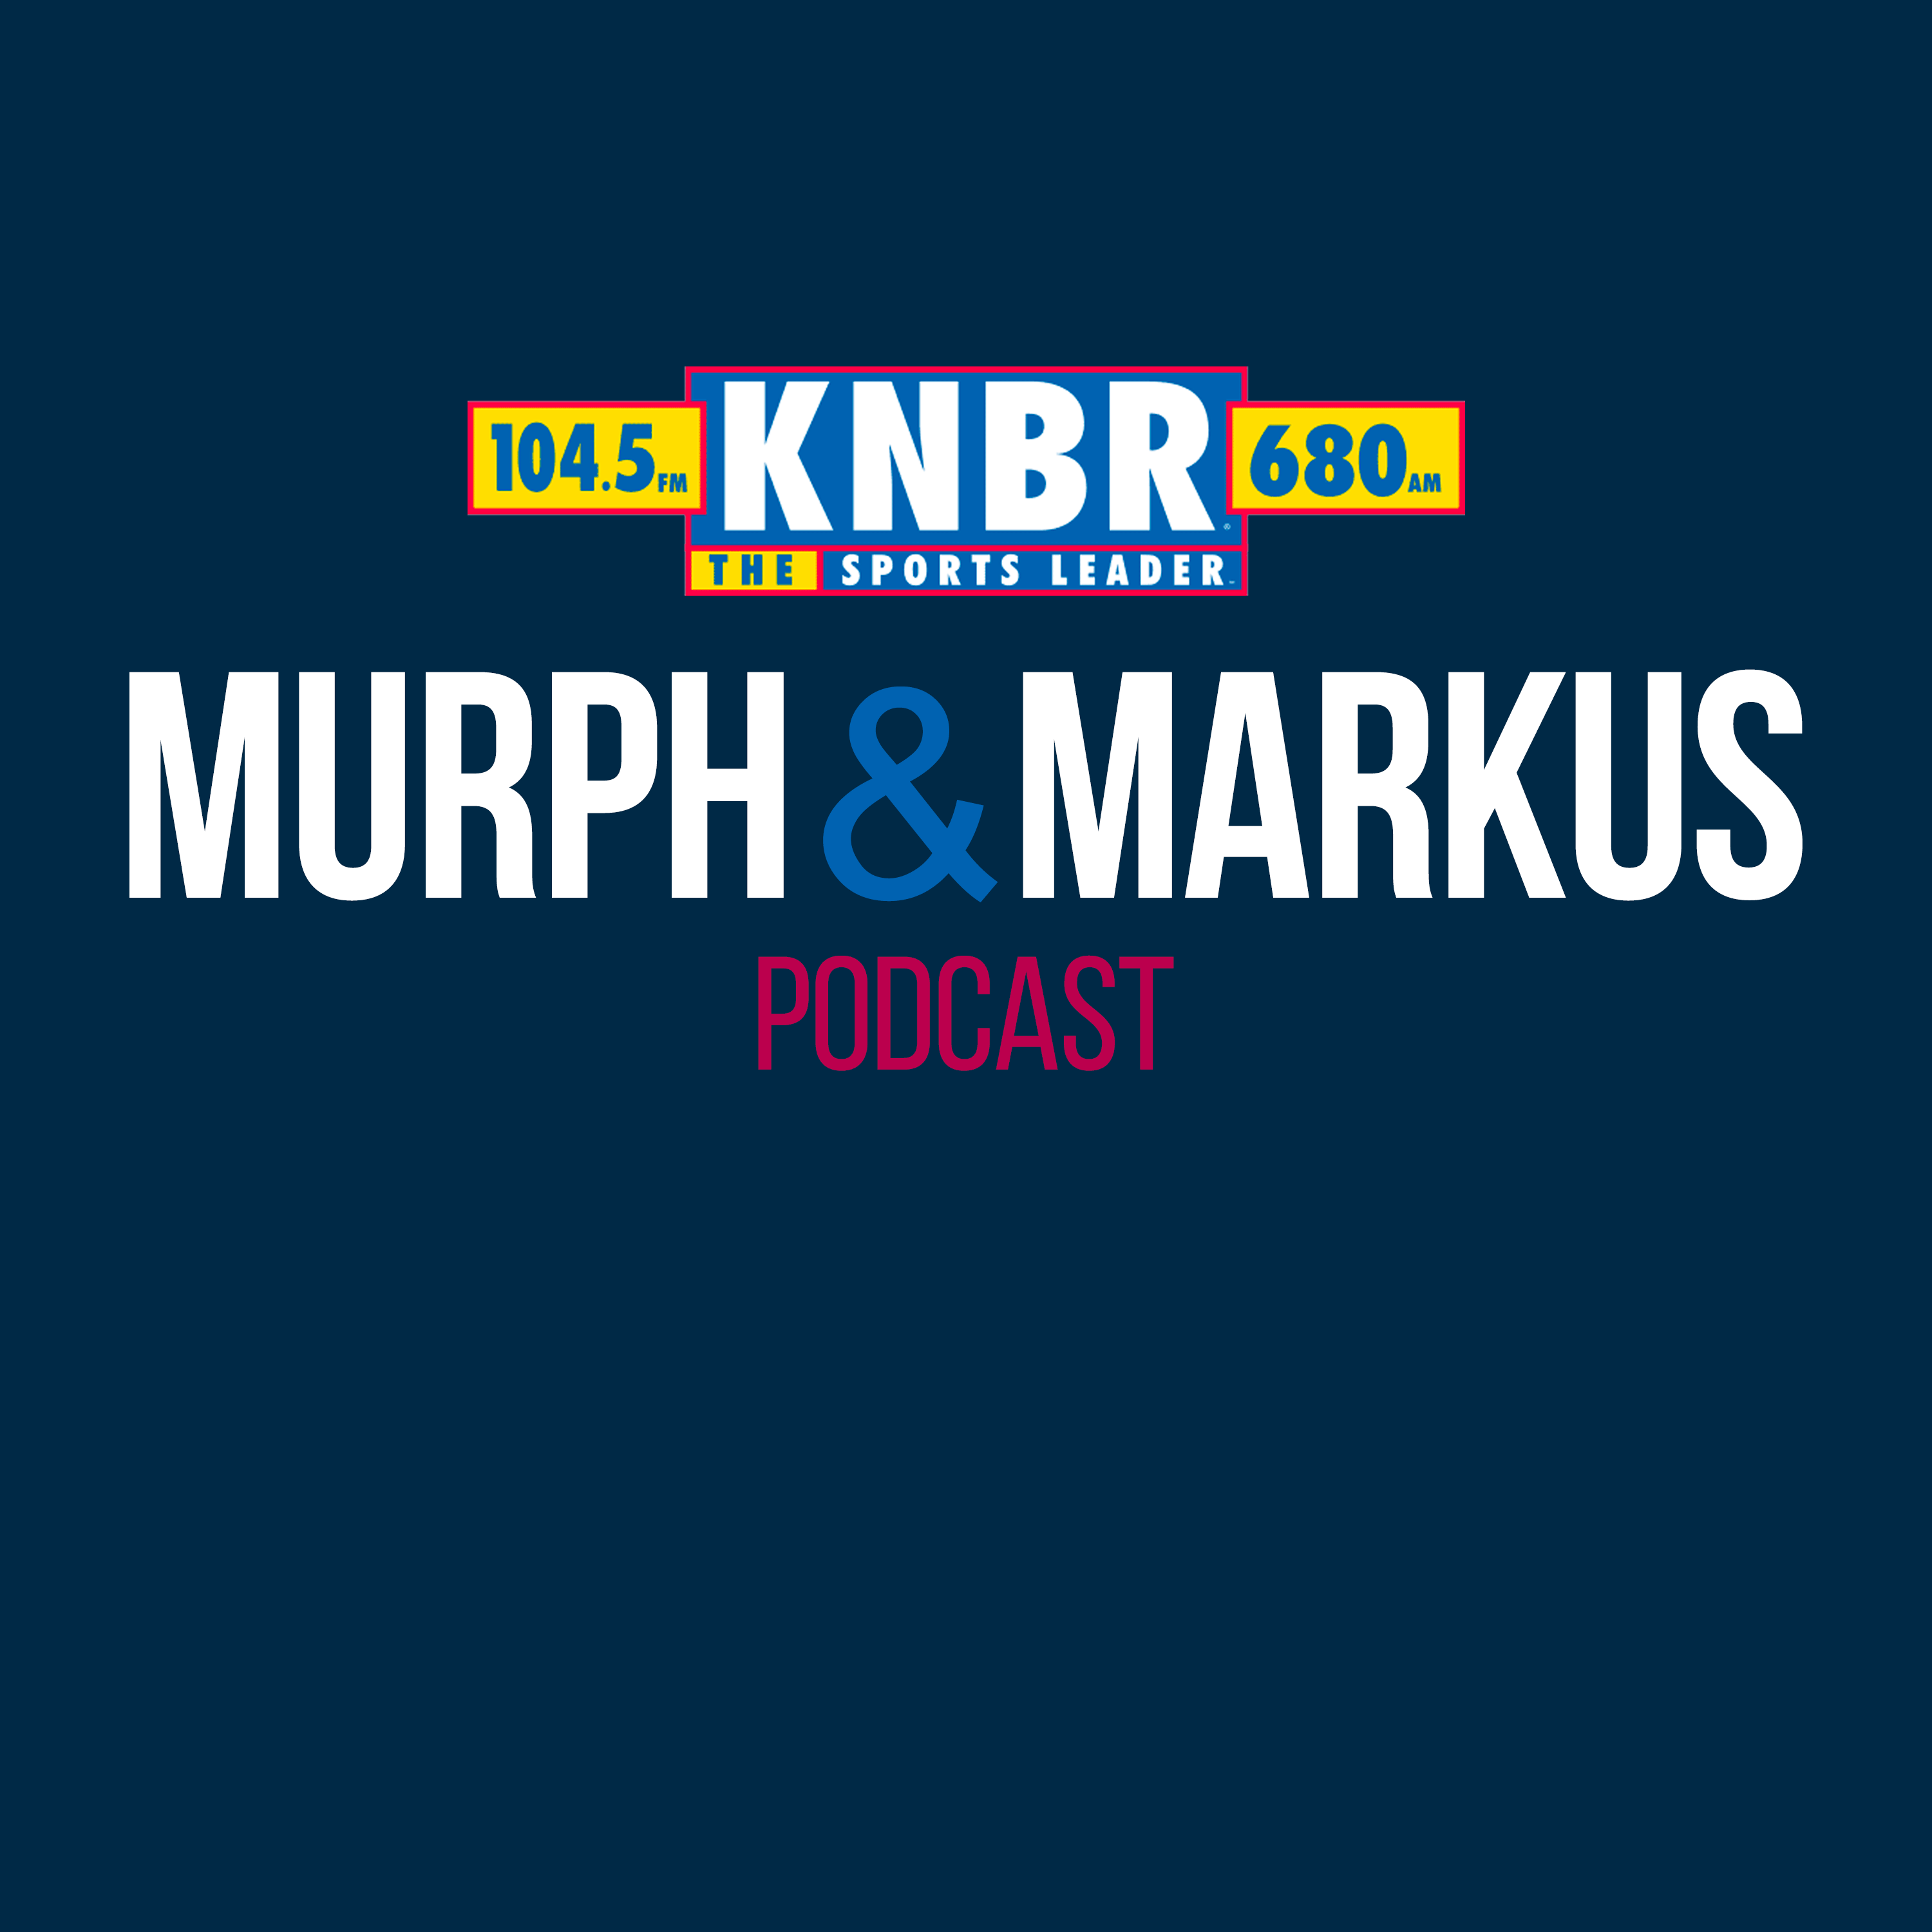 1-5 John Lynch joins Murph and Markus to deliver breaking news on who is playing and who is not and shares his thoughts on rest versus rust